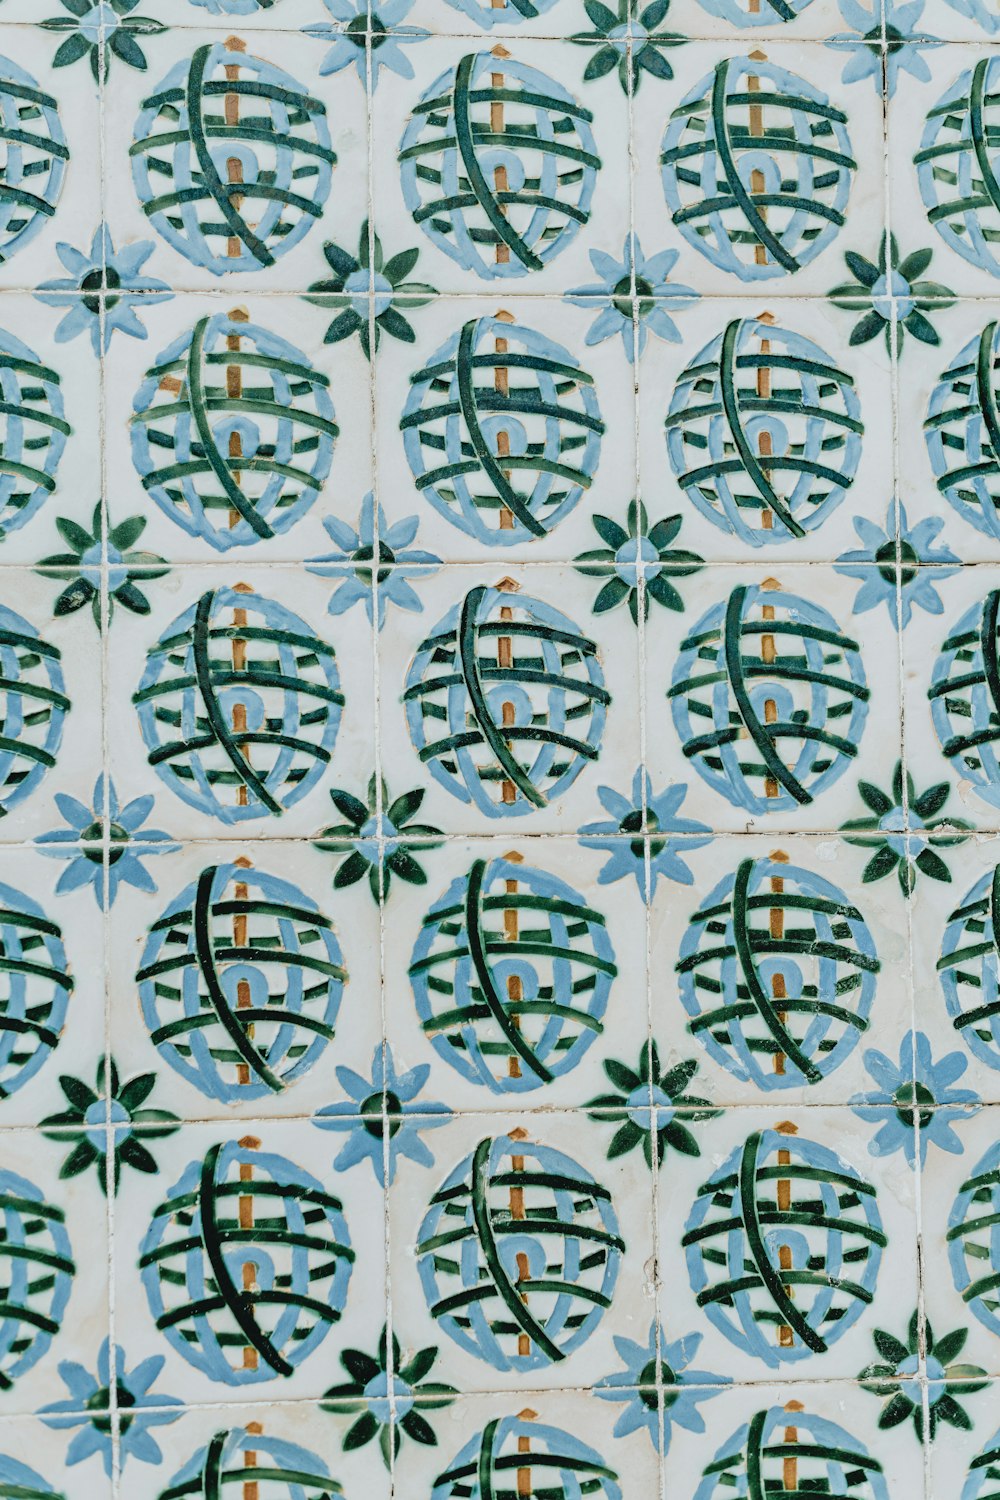 a close up of a tile with designs on it